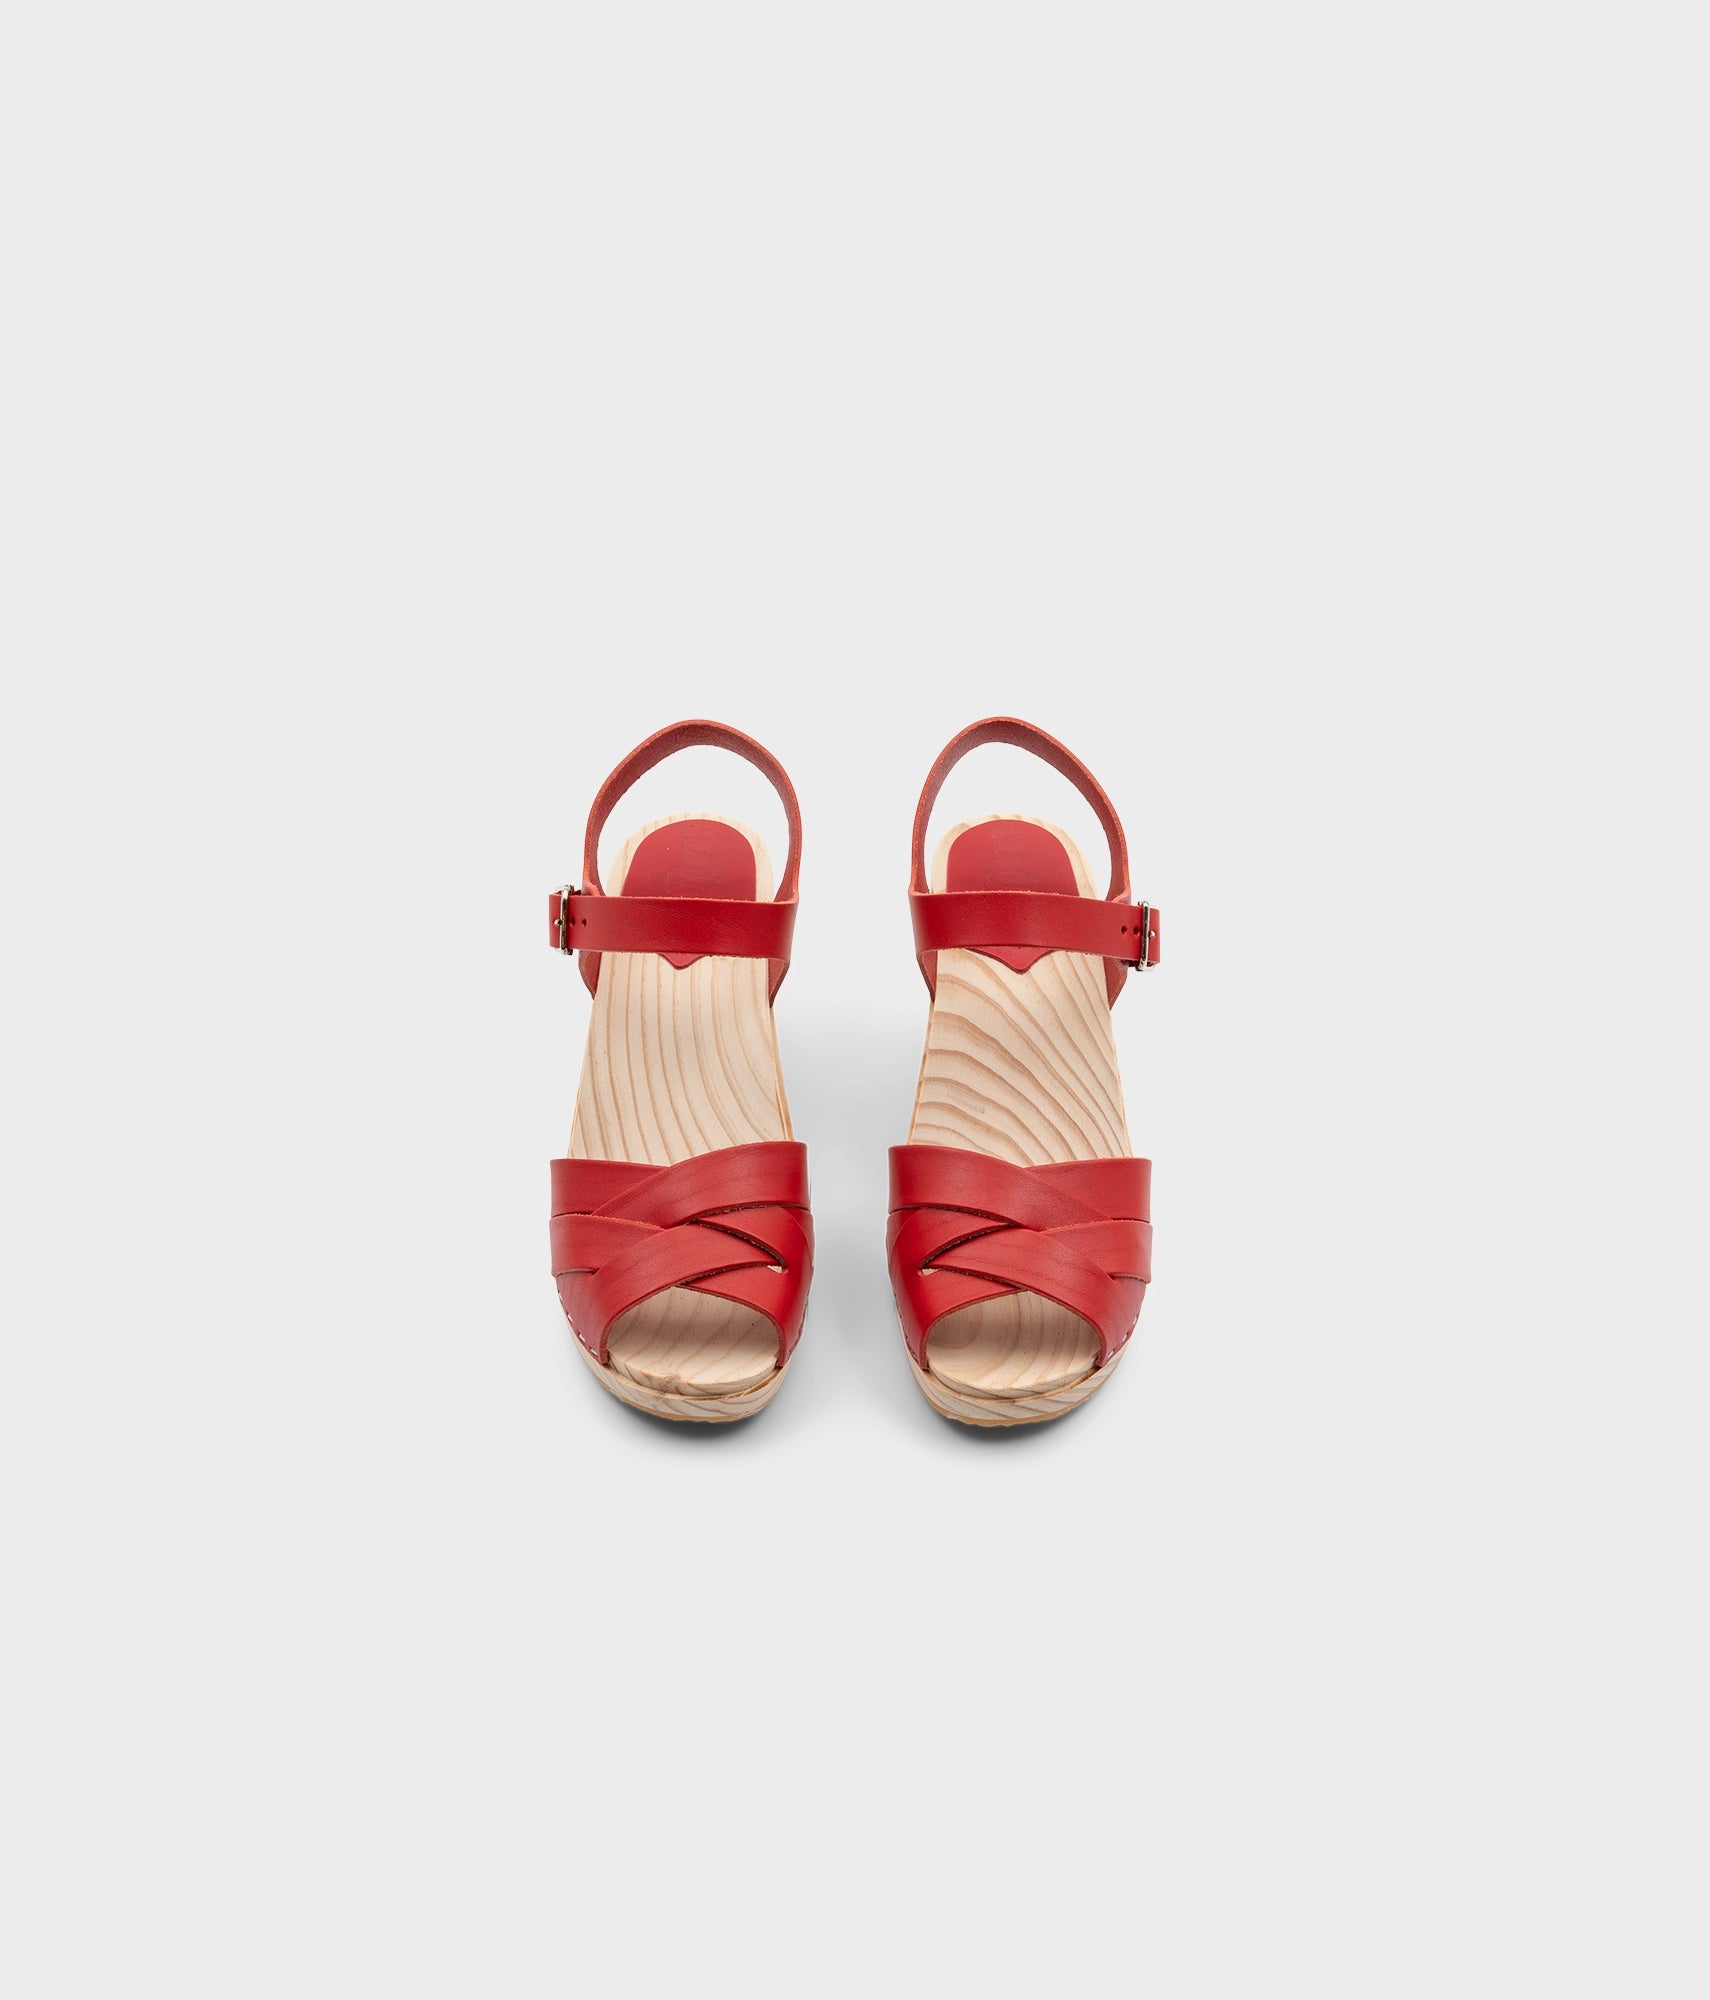 High rise heel clog sandals in red vegetable tanned leather stapled on a light wooden base with an open toe